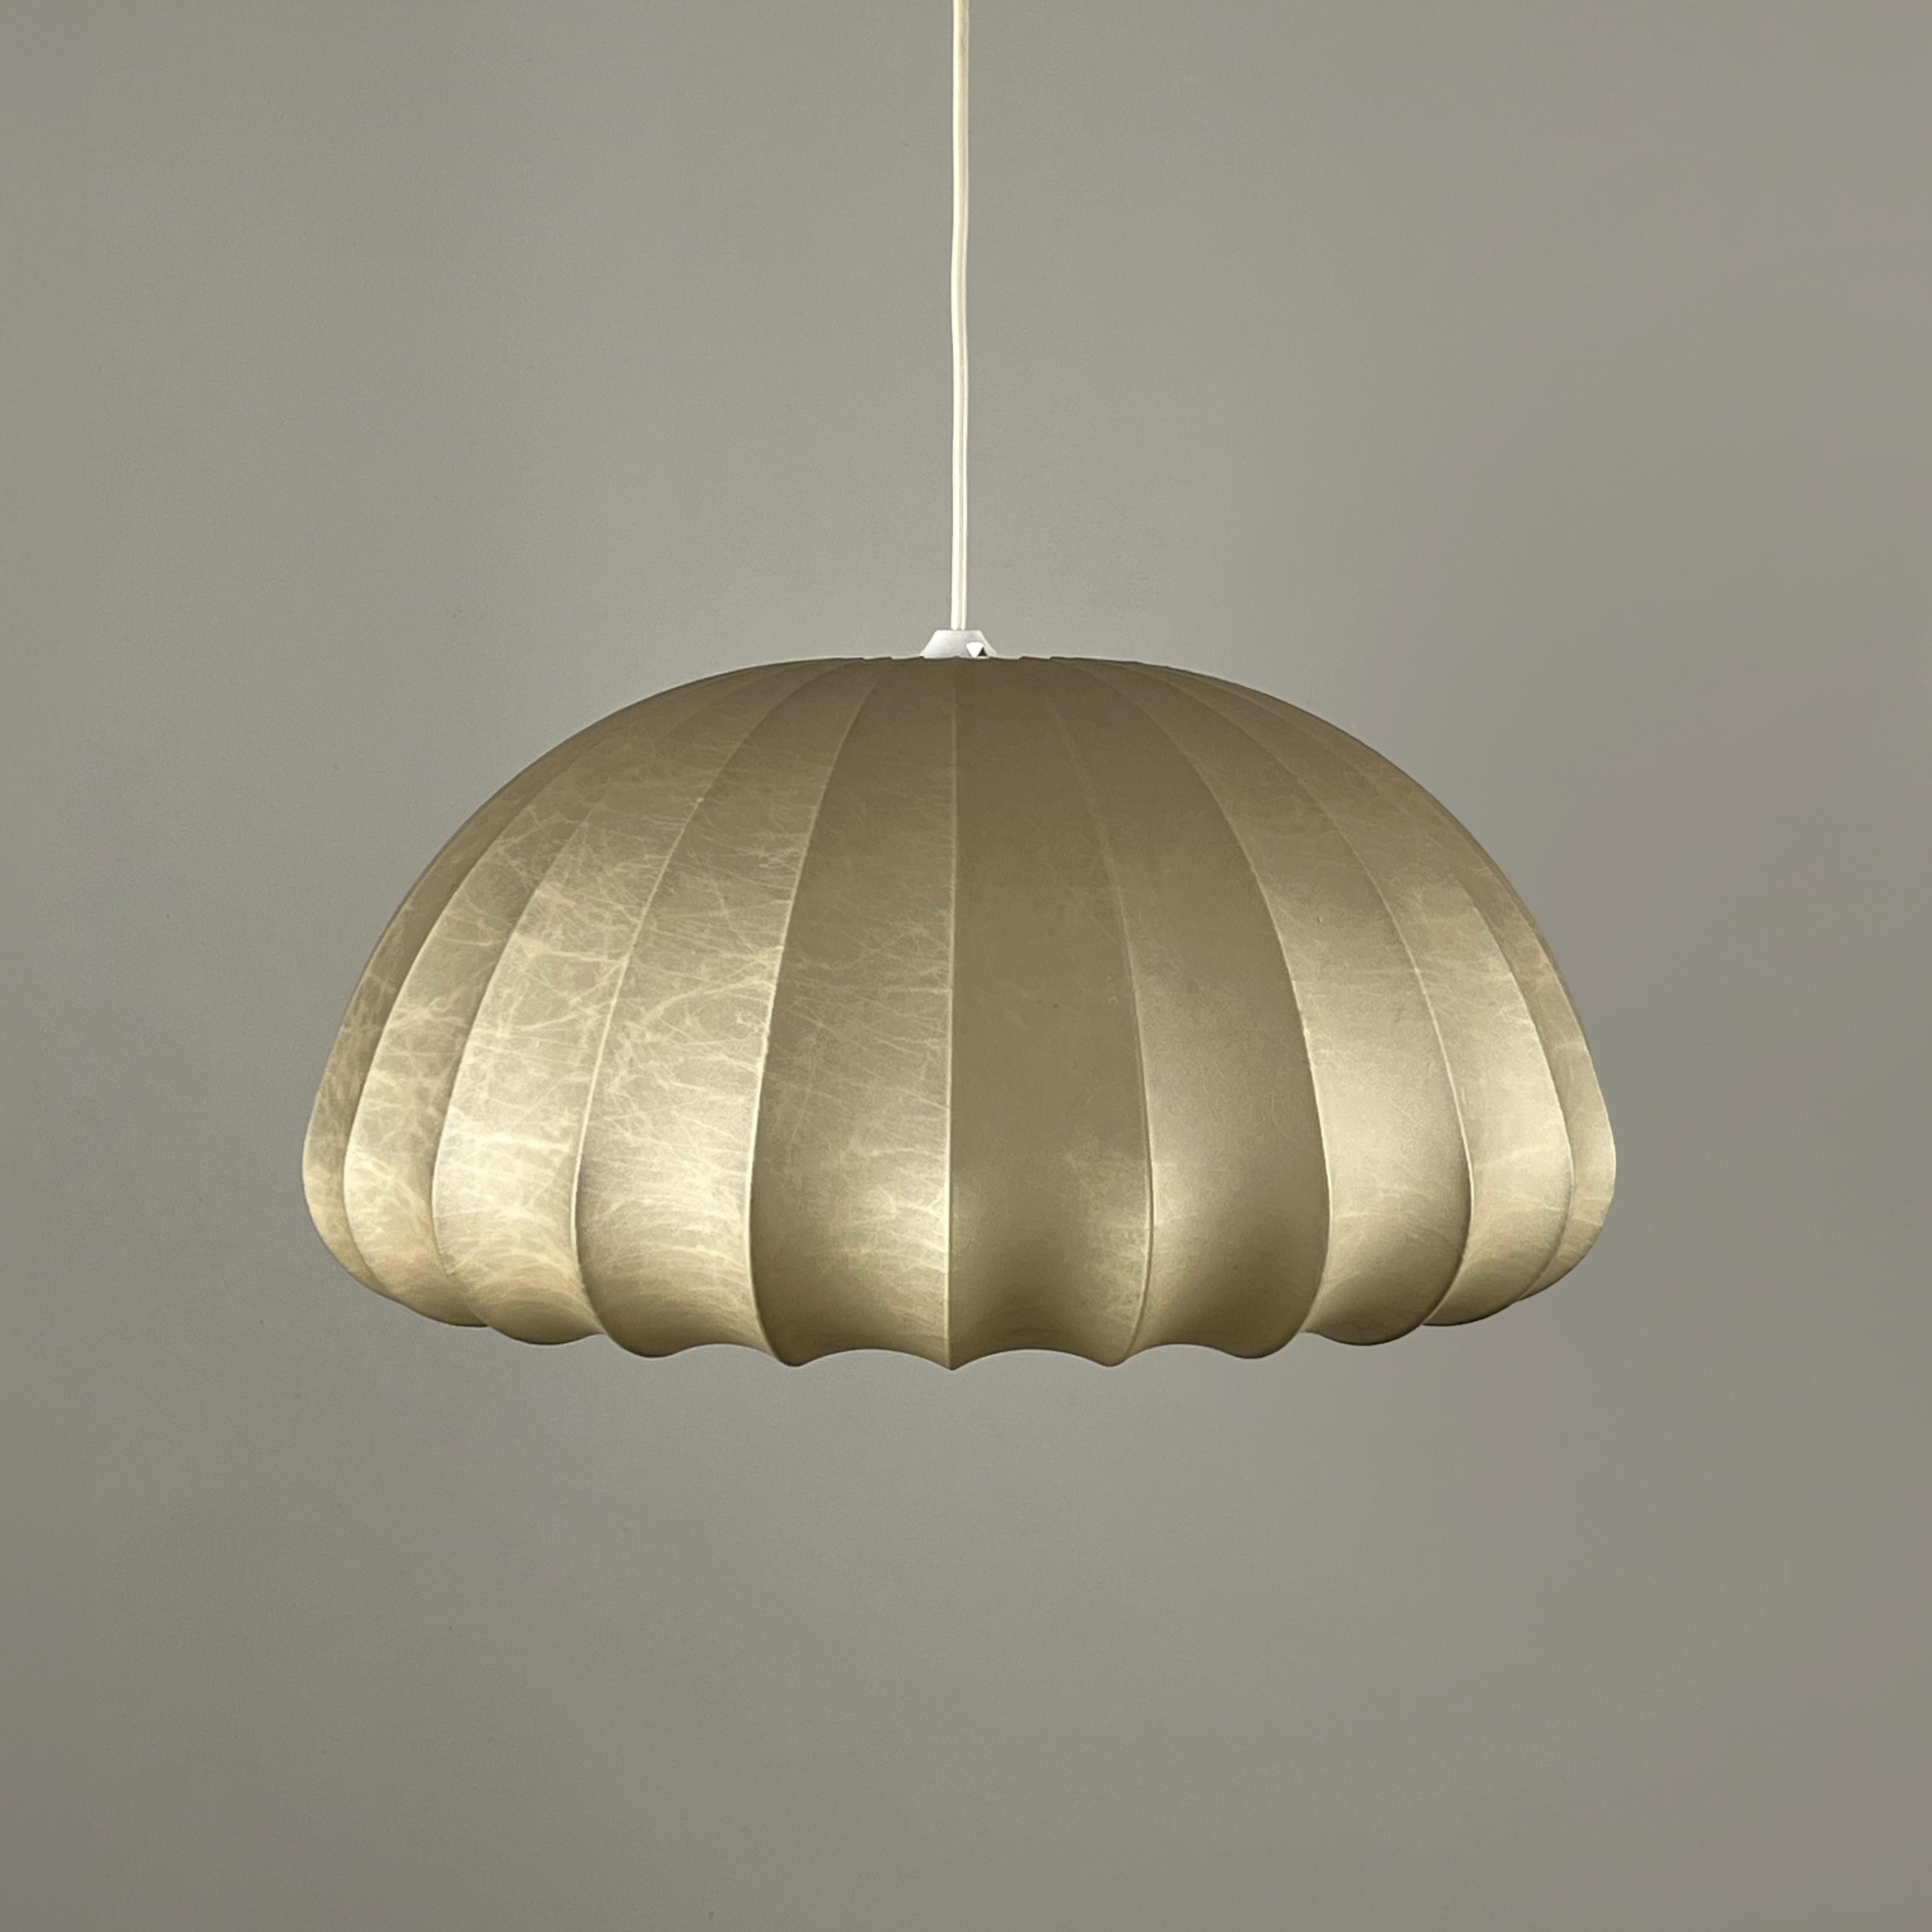 Cocoon chandelier designed by Friedel Wauer for Goldkant Leuchten, Germany 1970s For Sale 3